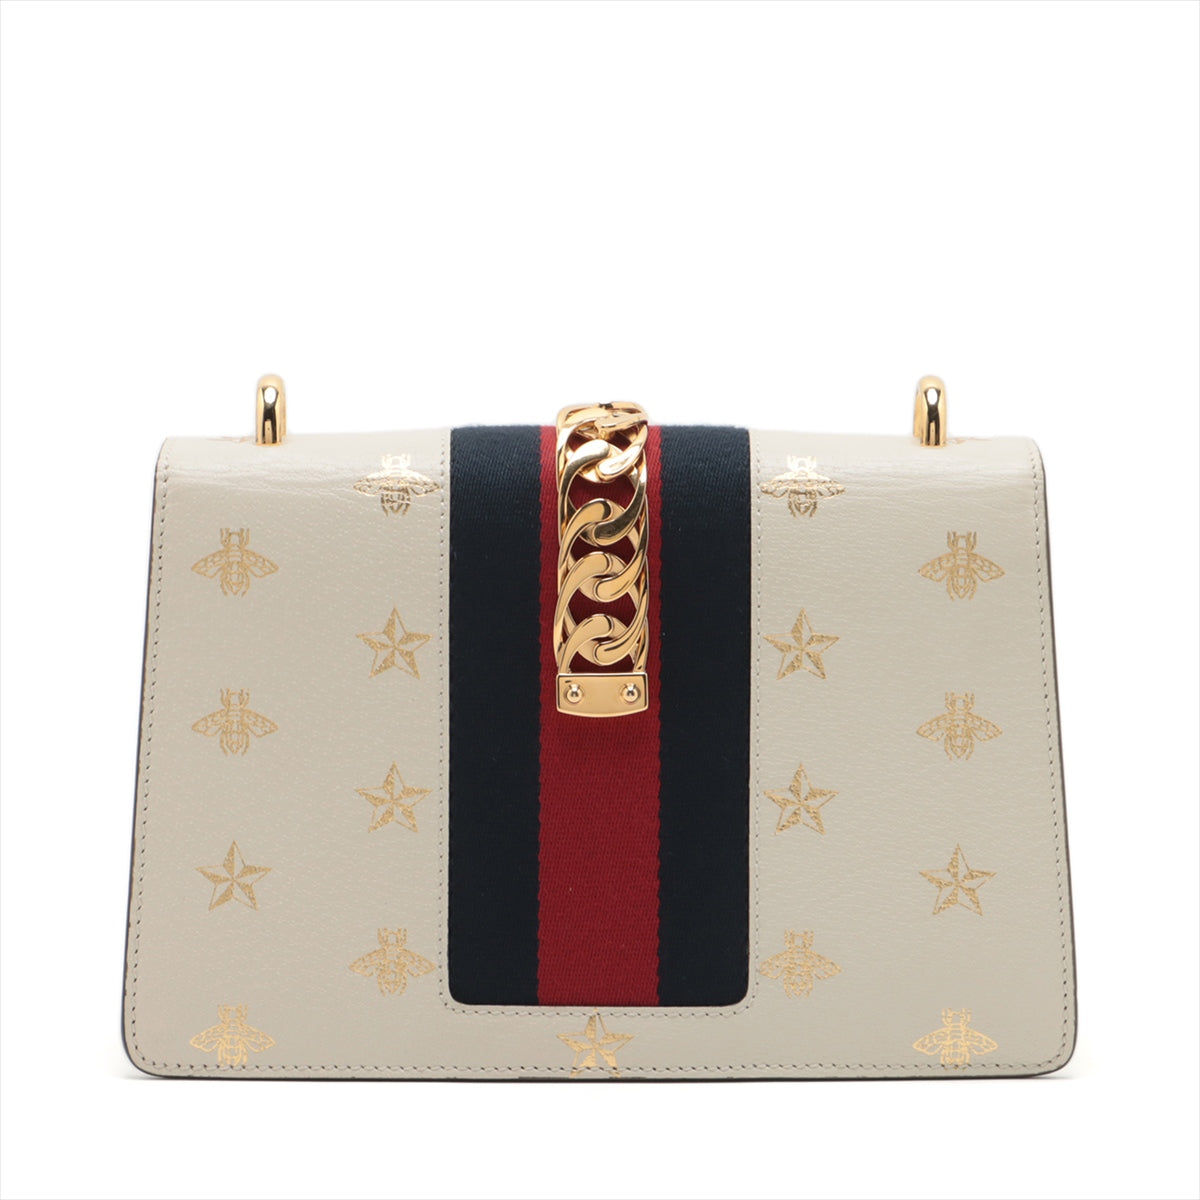 Gucci Bee & Star Leather Shoulder Bag White 524405